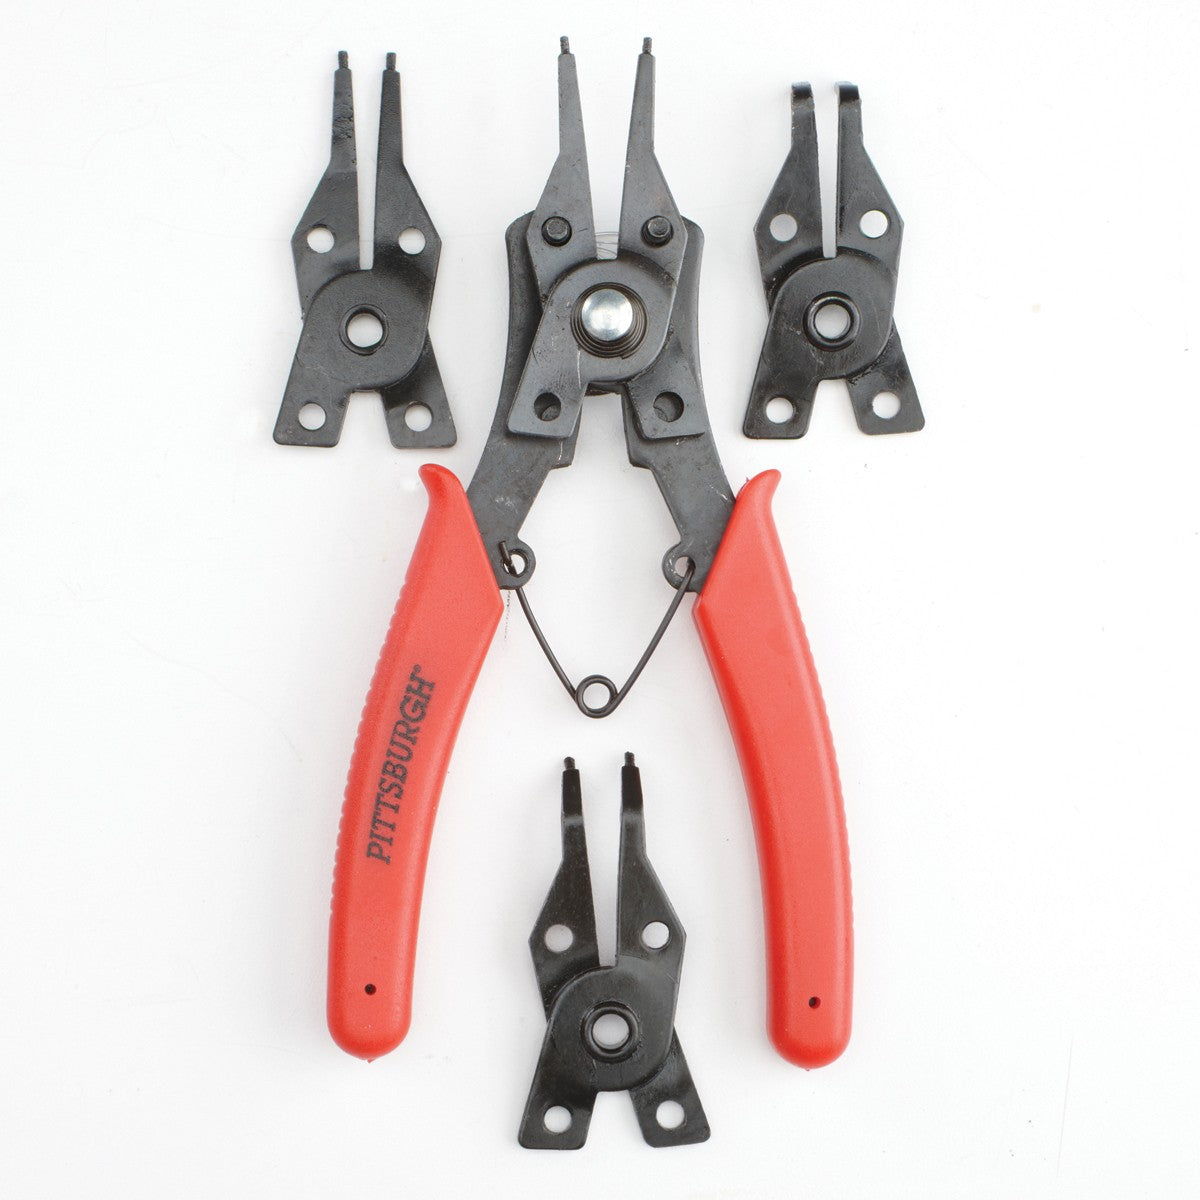 Pittsburgh Snap Ring Pliers with Interchangeable Heads